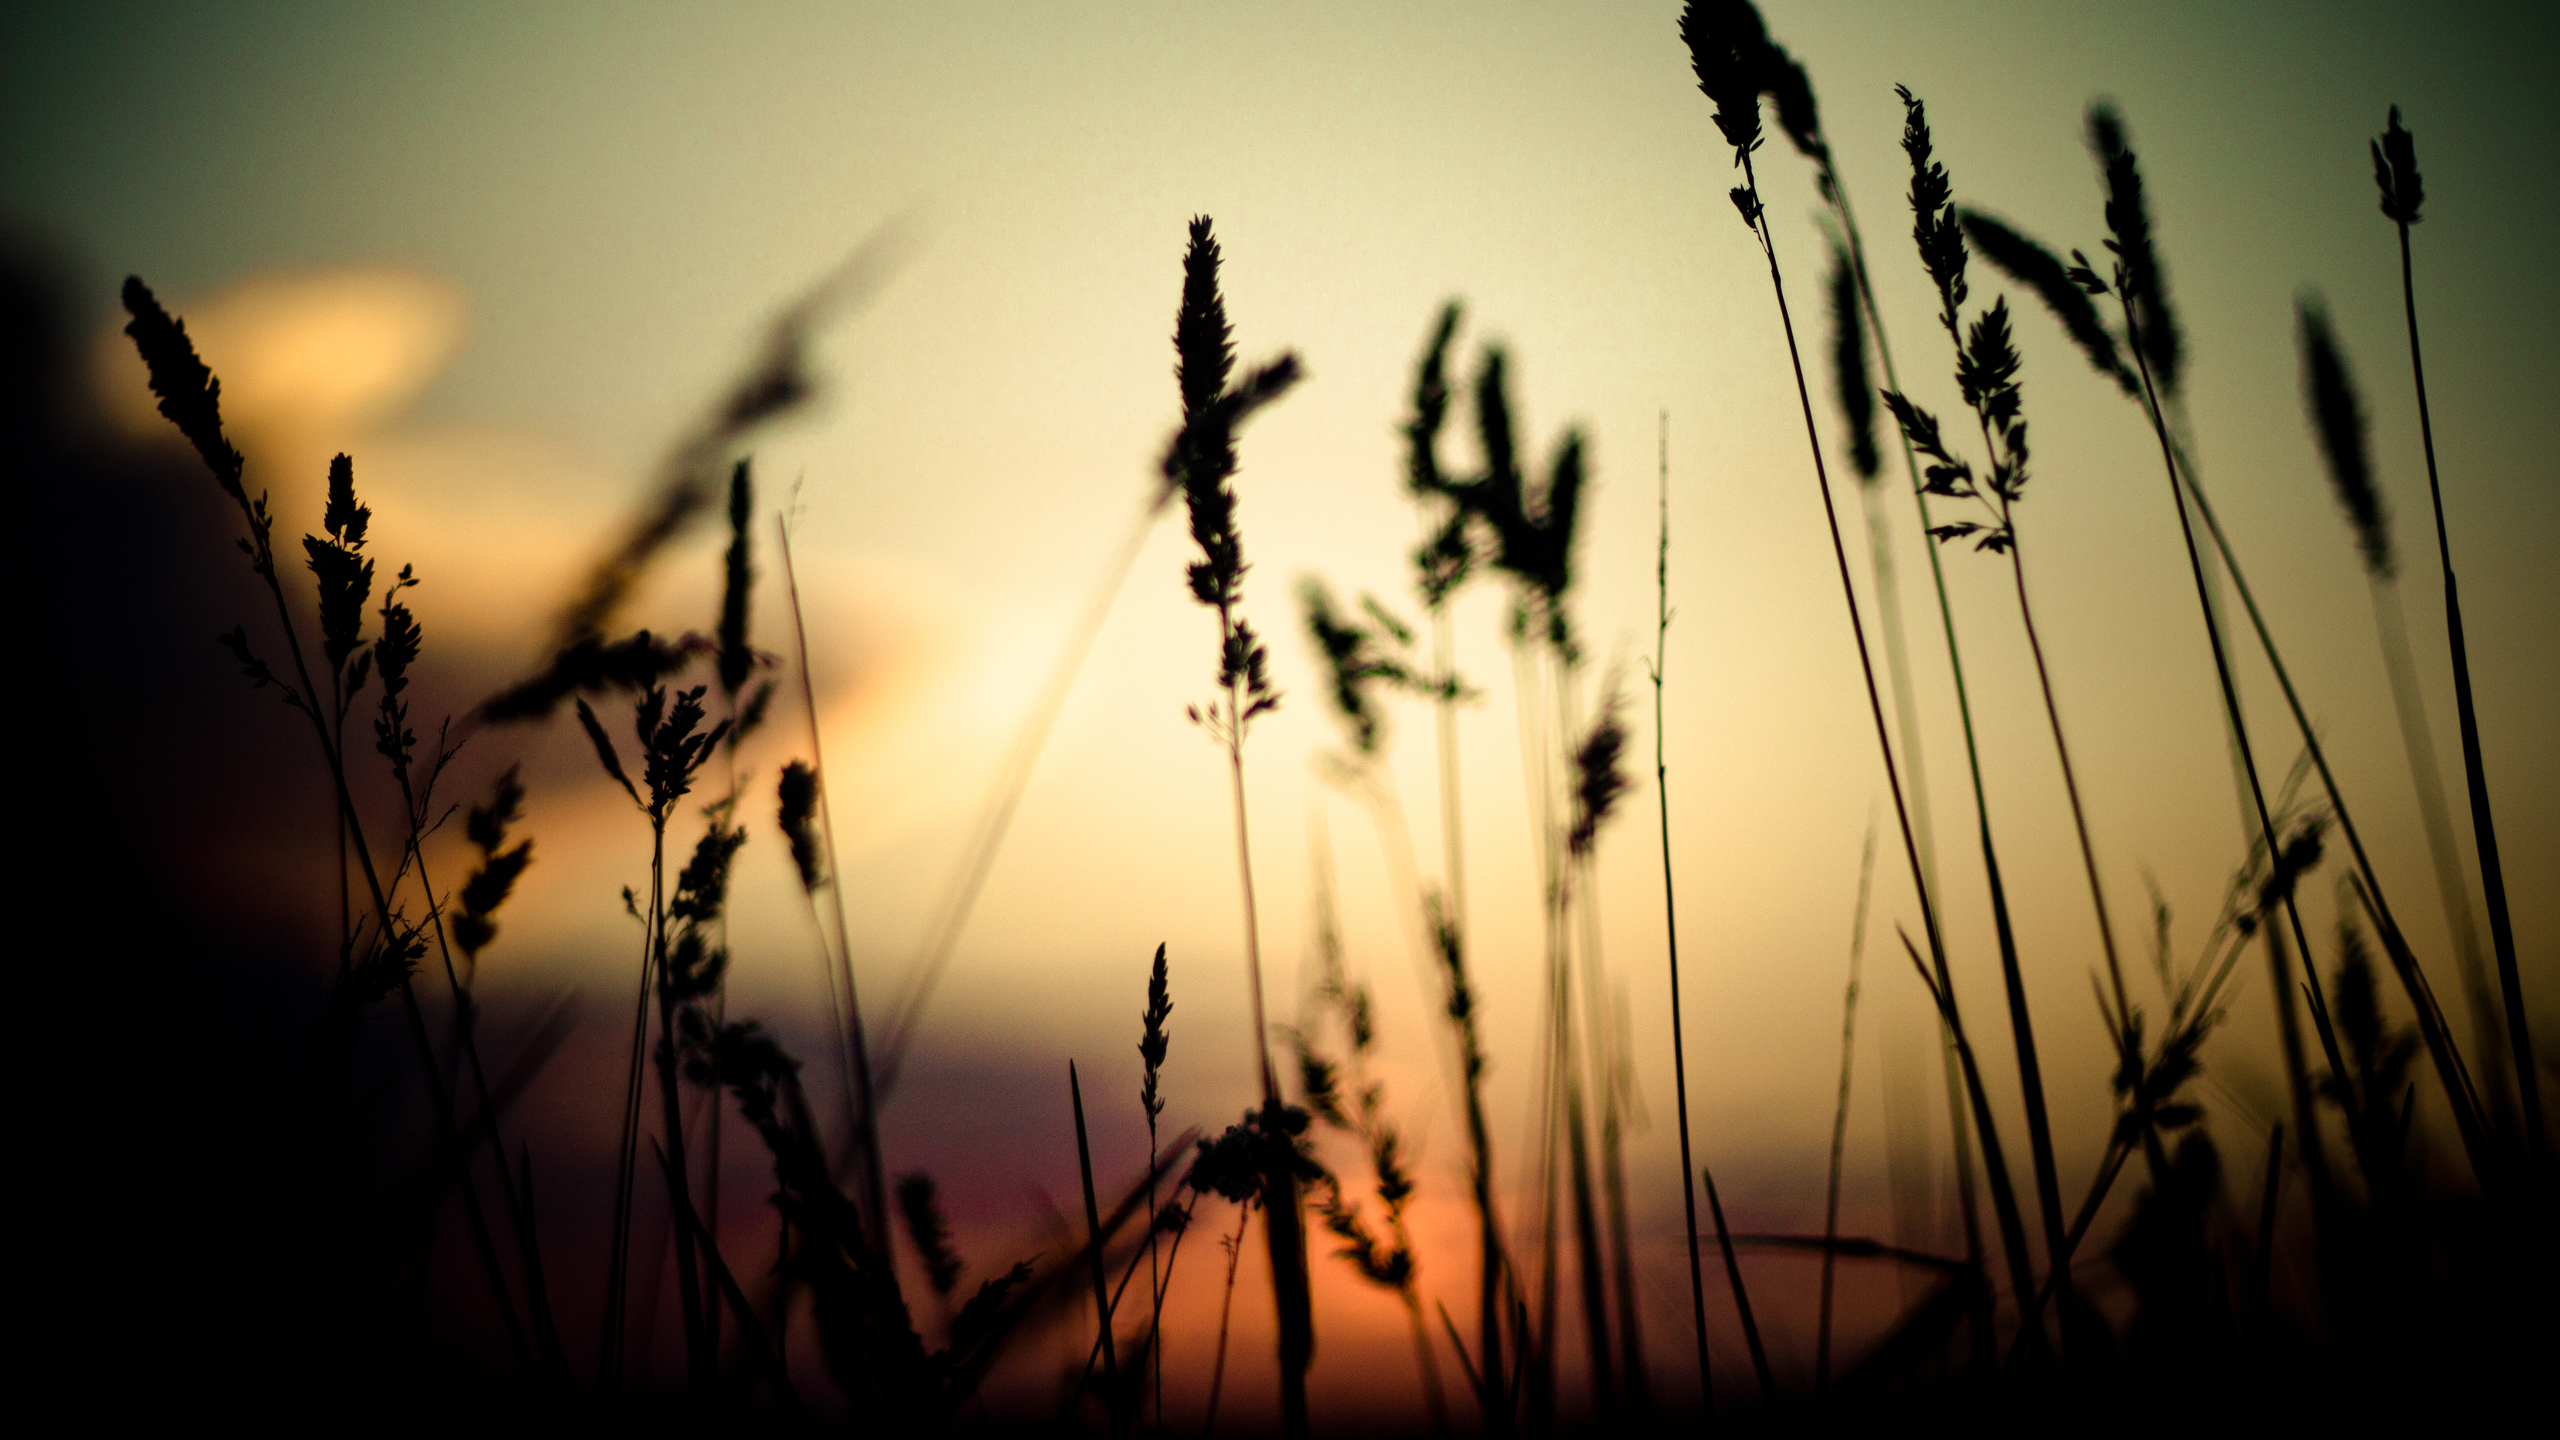 General 2560x1440 grass nature depth of field spikelets sunset silhouette plants macro